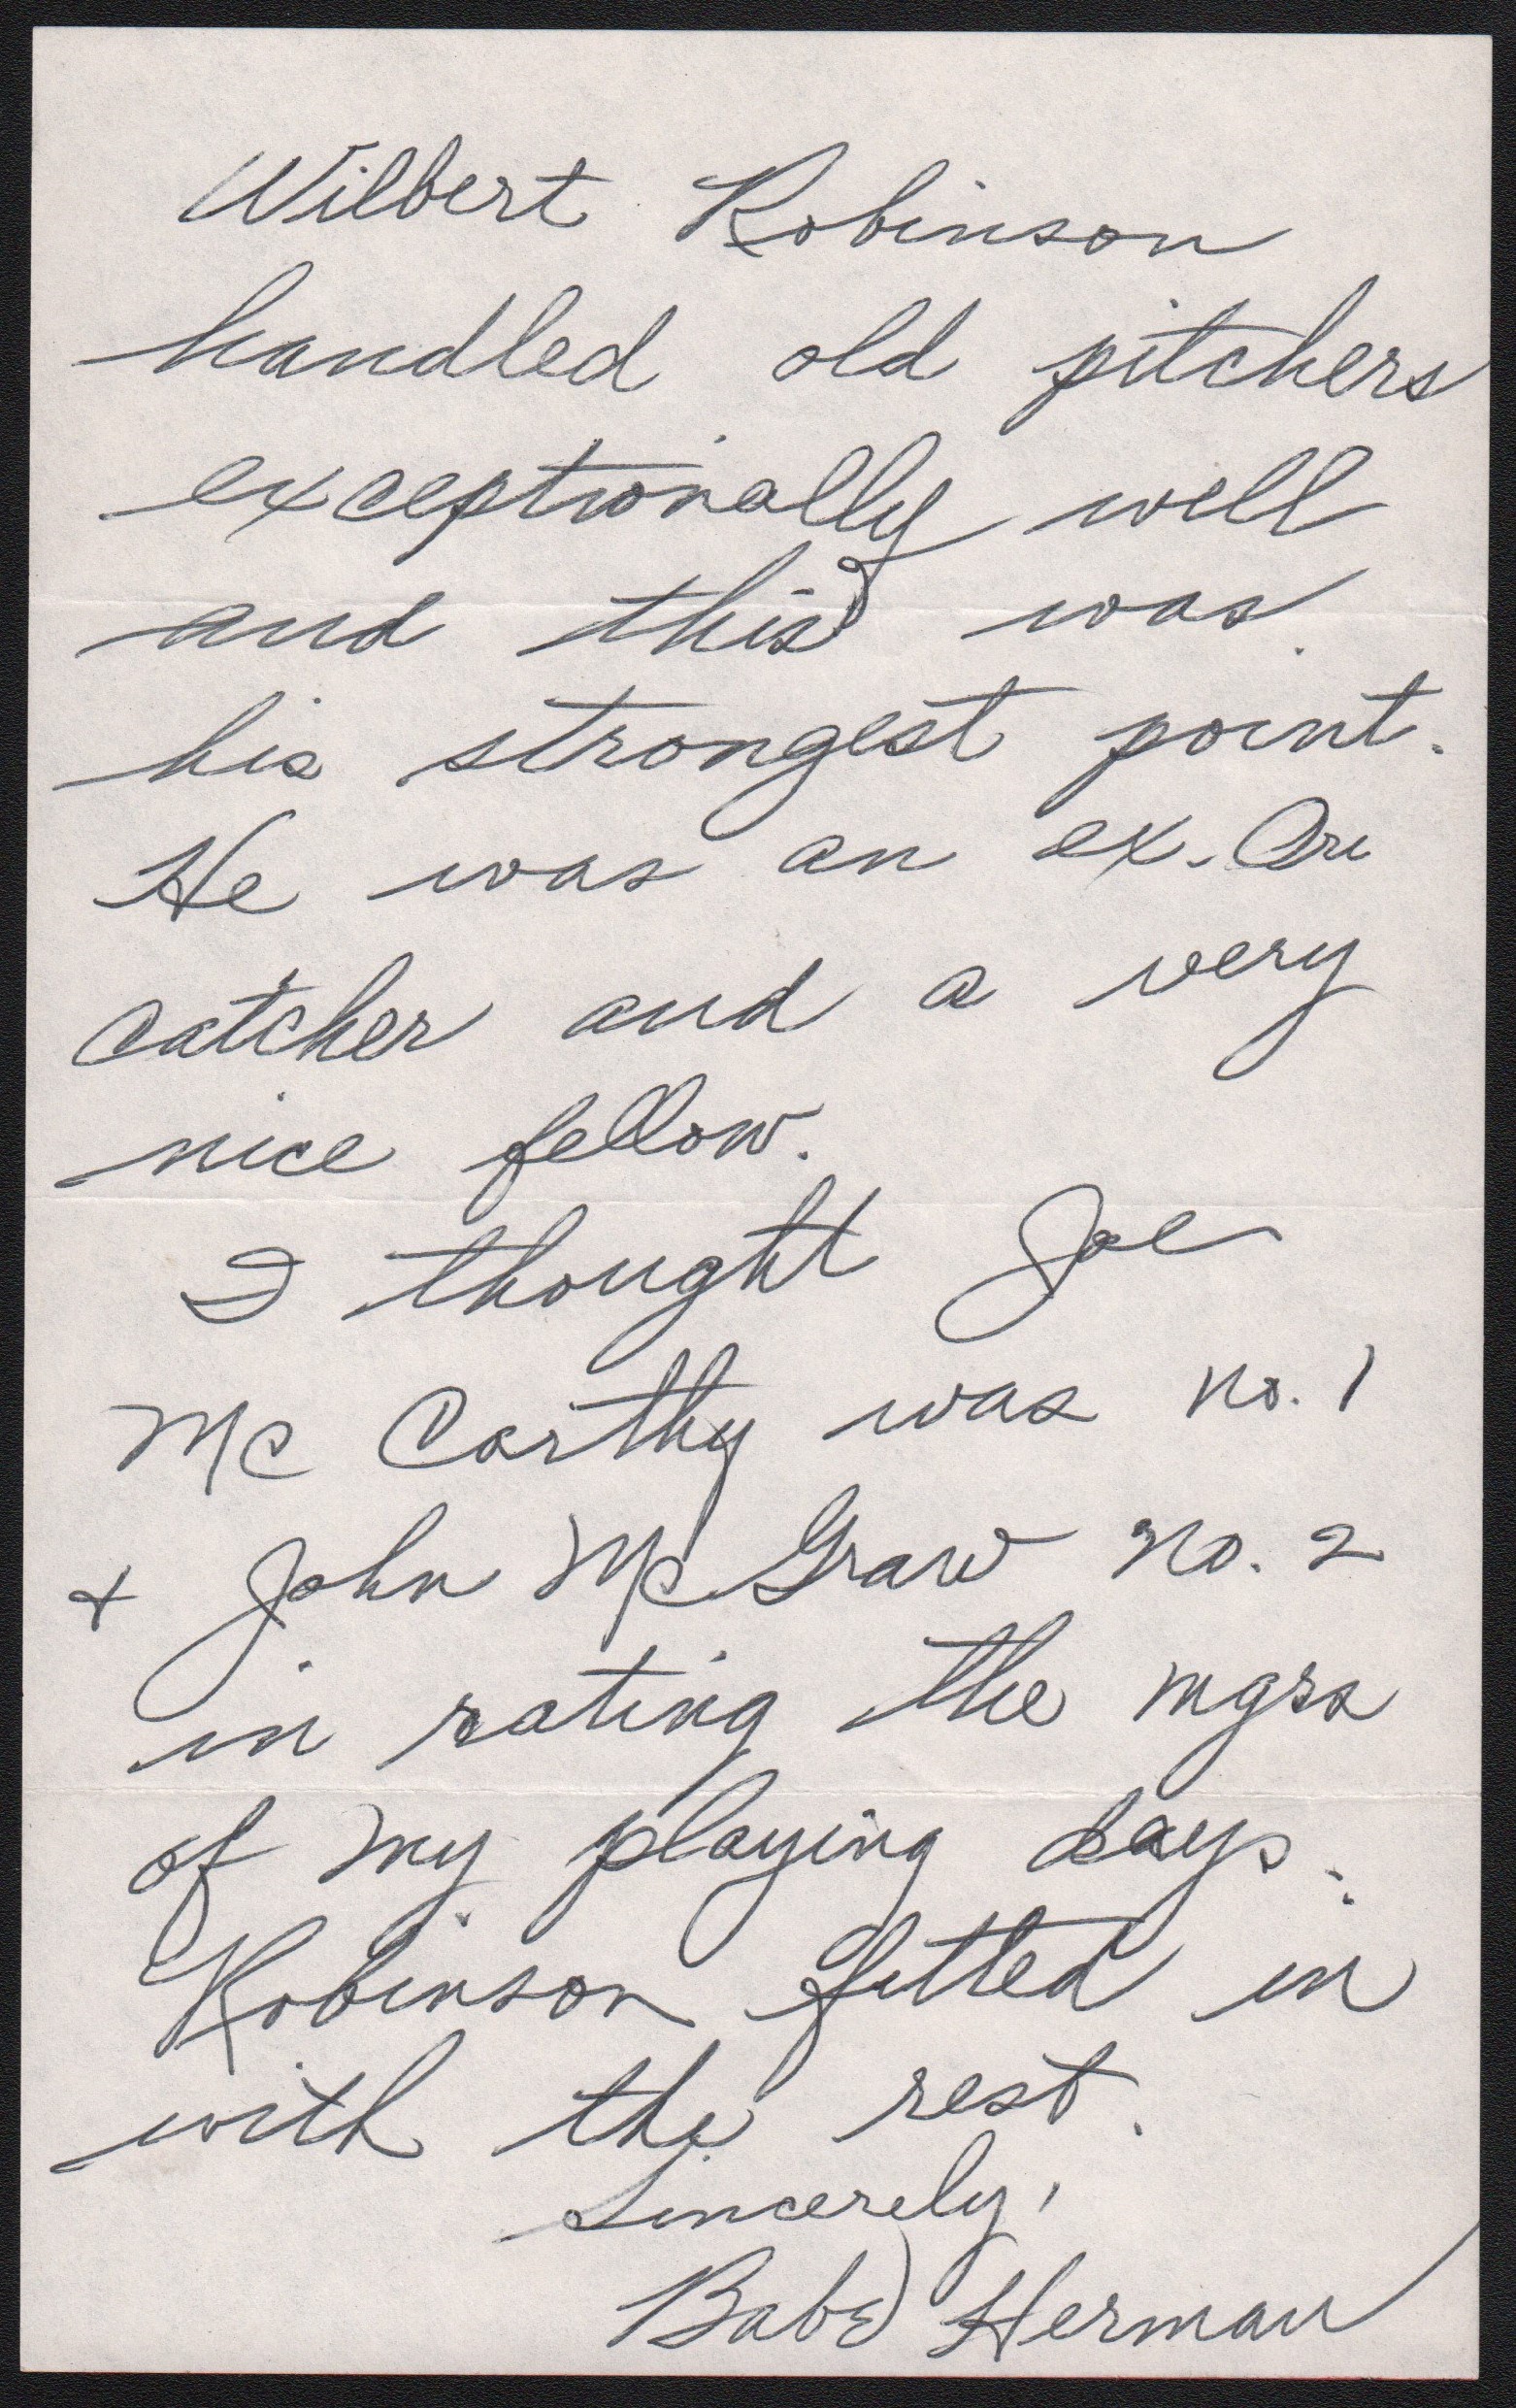 Baseball Autographs - Babe Herman 1-Page Handwritten Letter w/McCarthy & McGraw Content